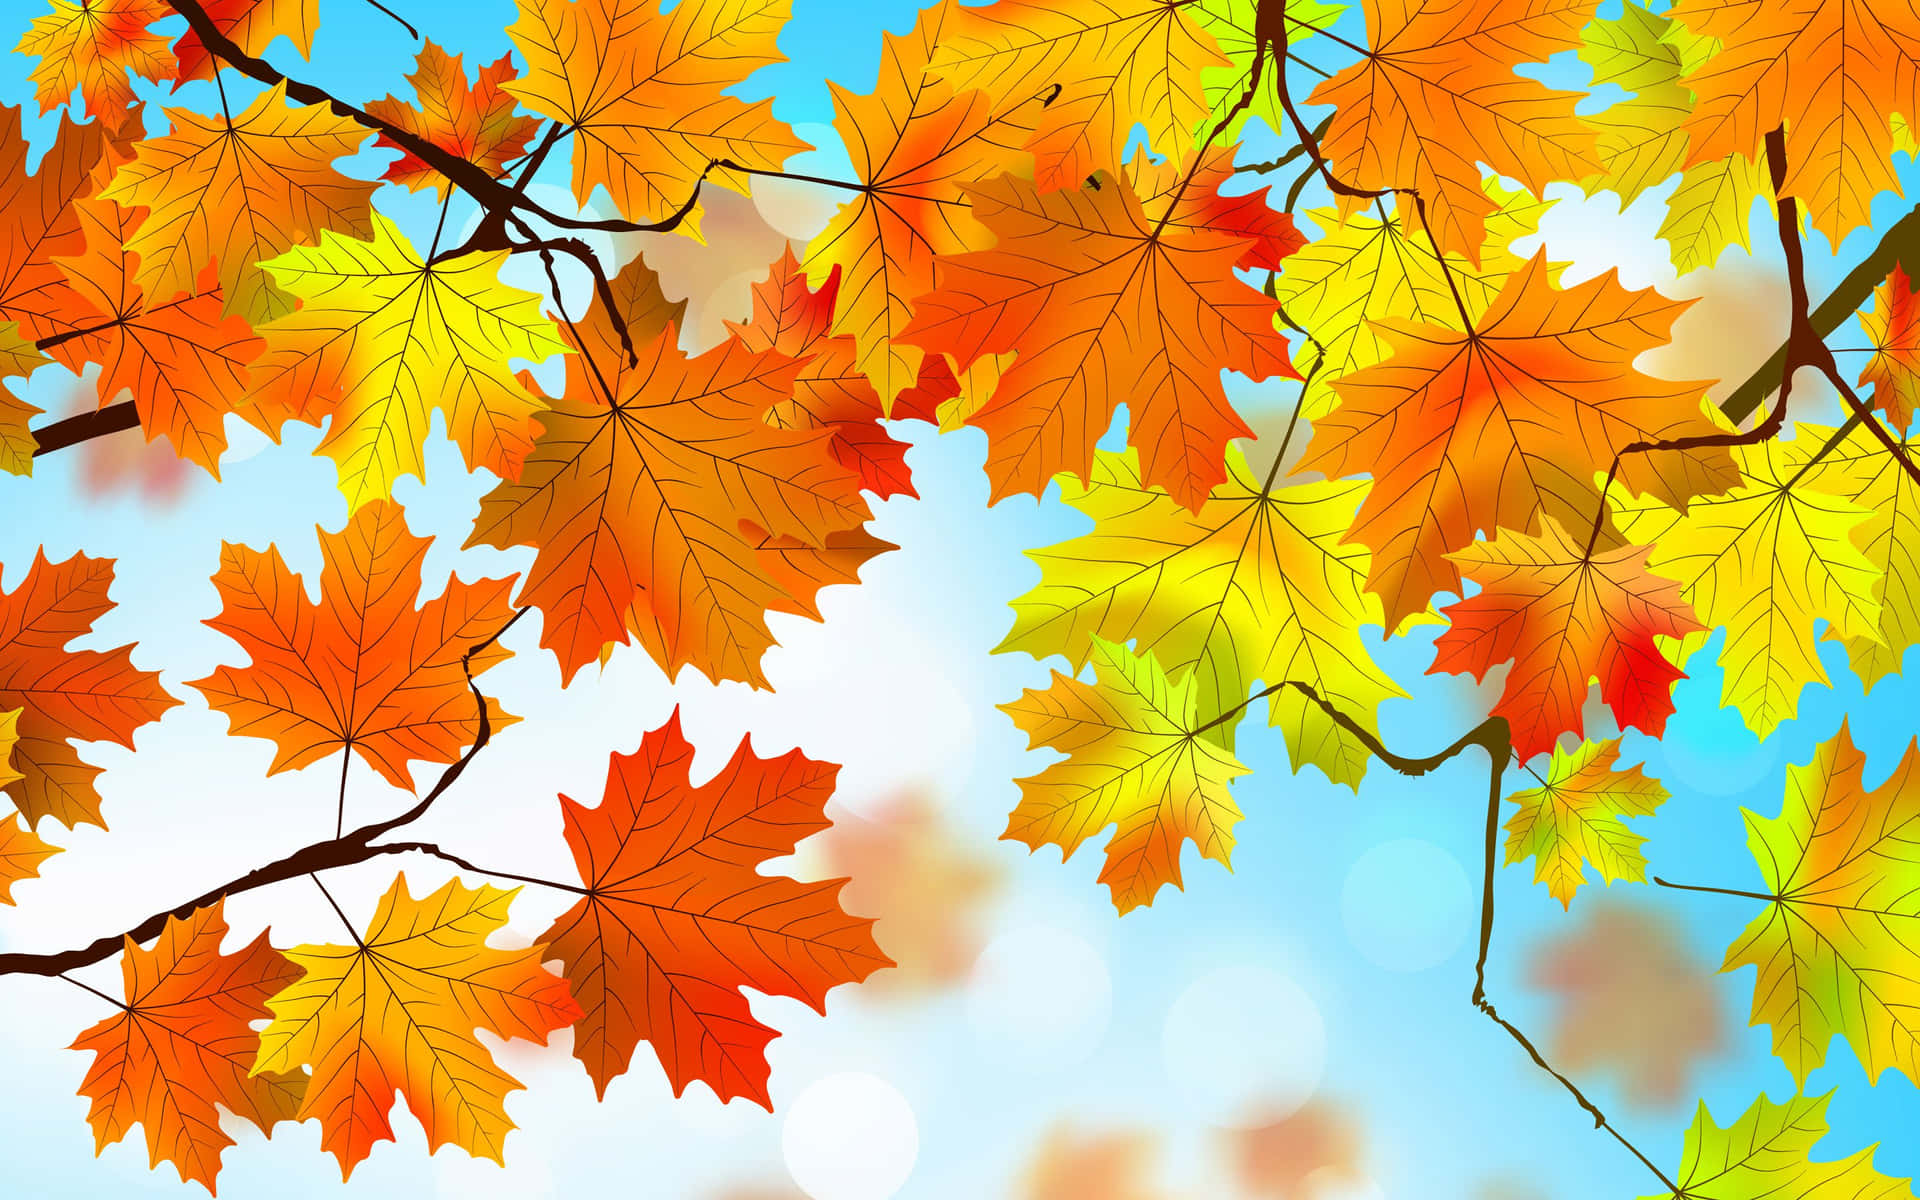 A colorful autumn scene featuring a wide variety of foliage